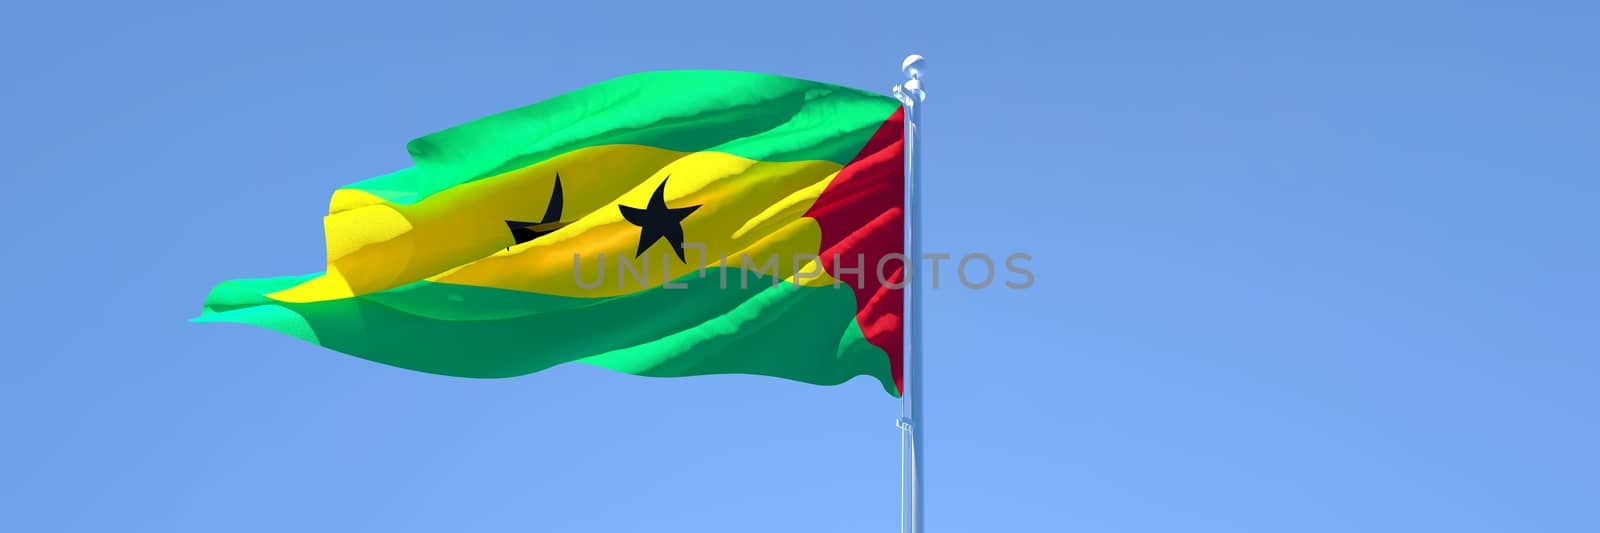 3D rendering of the national flag of Sao Tome And Principe waving in the wind against a blue sky